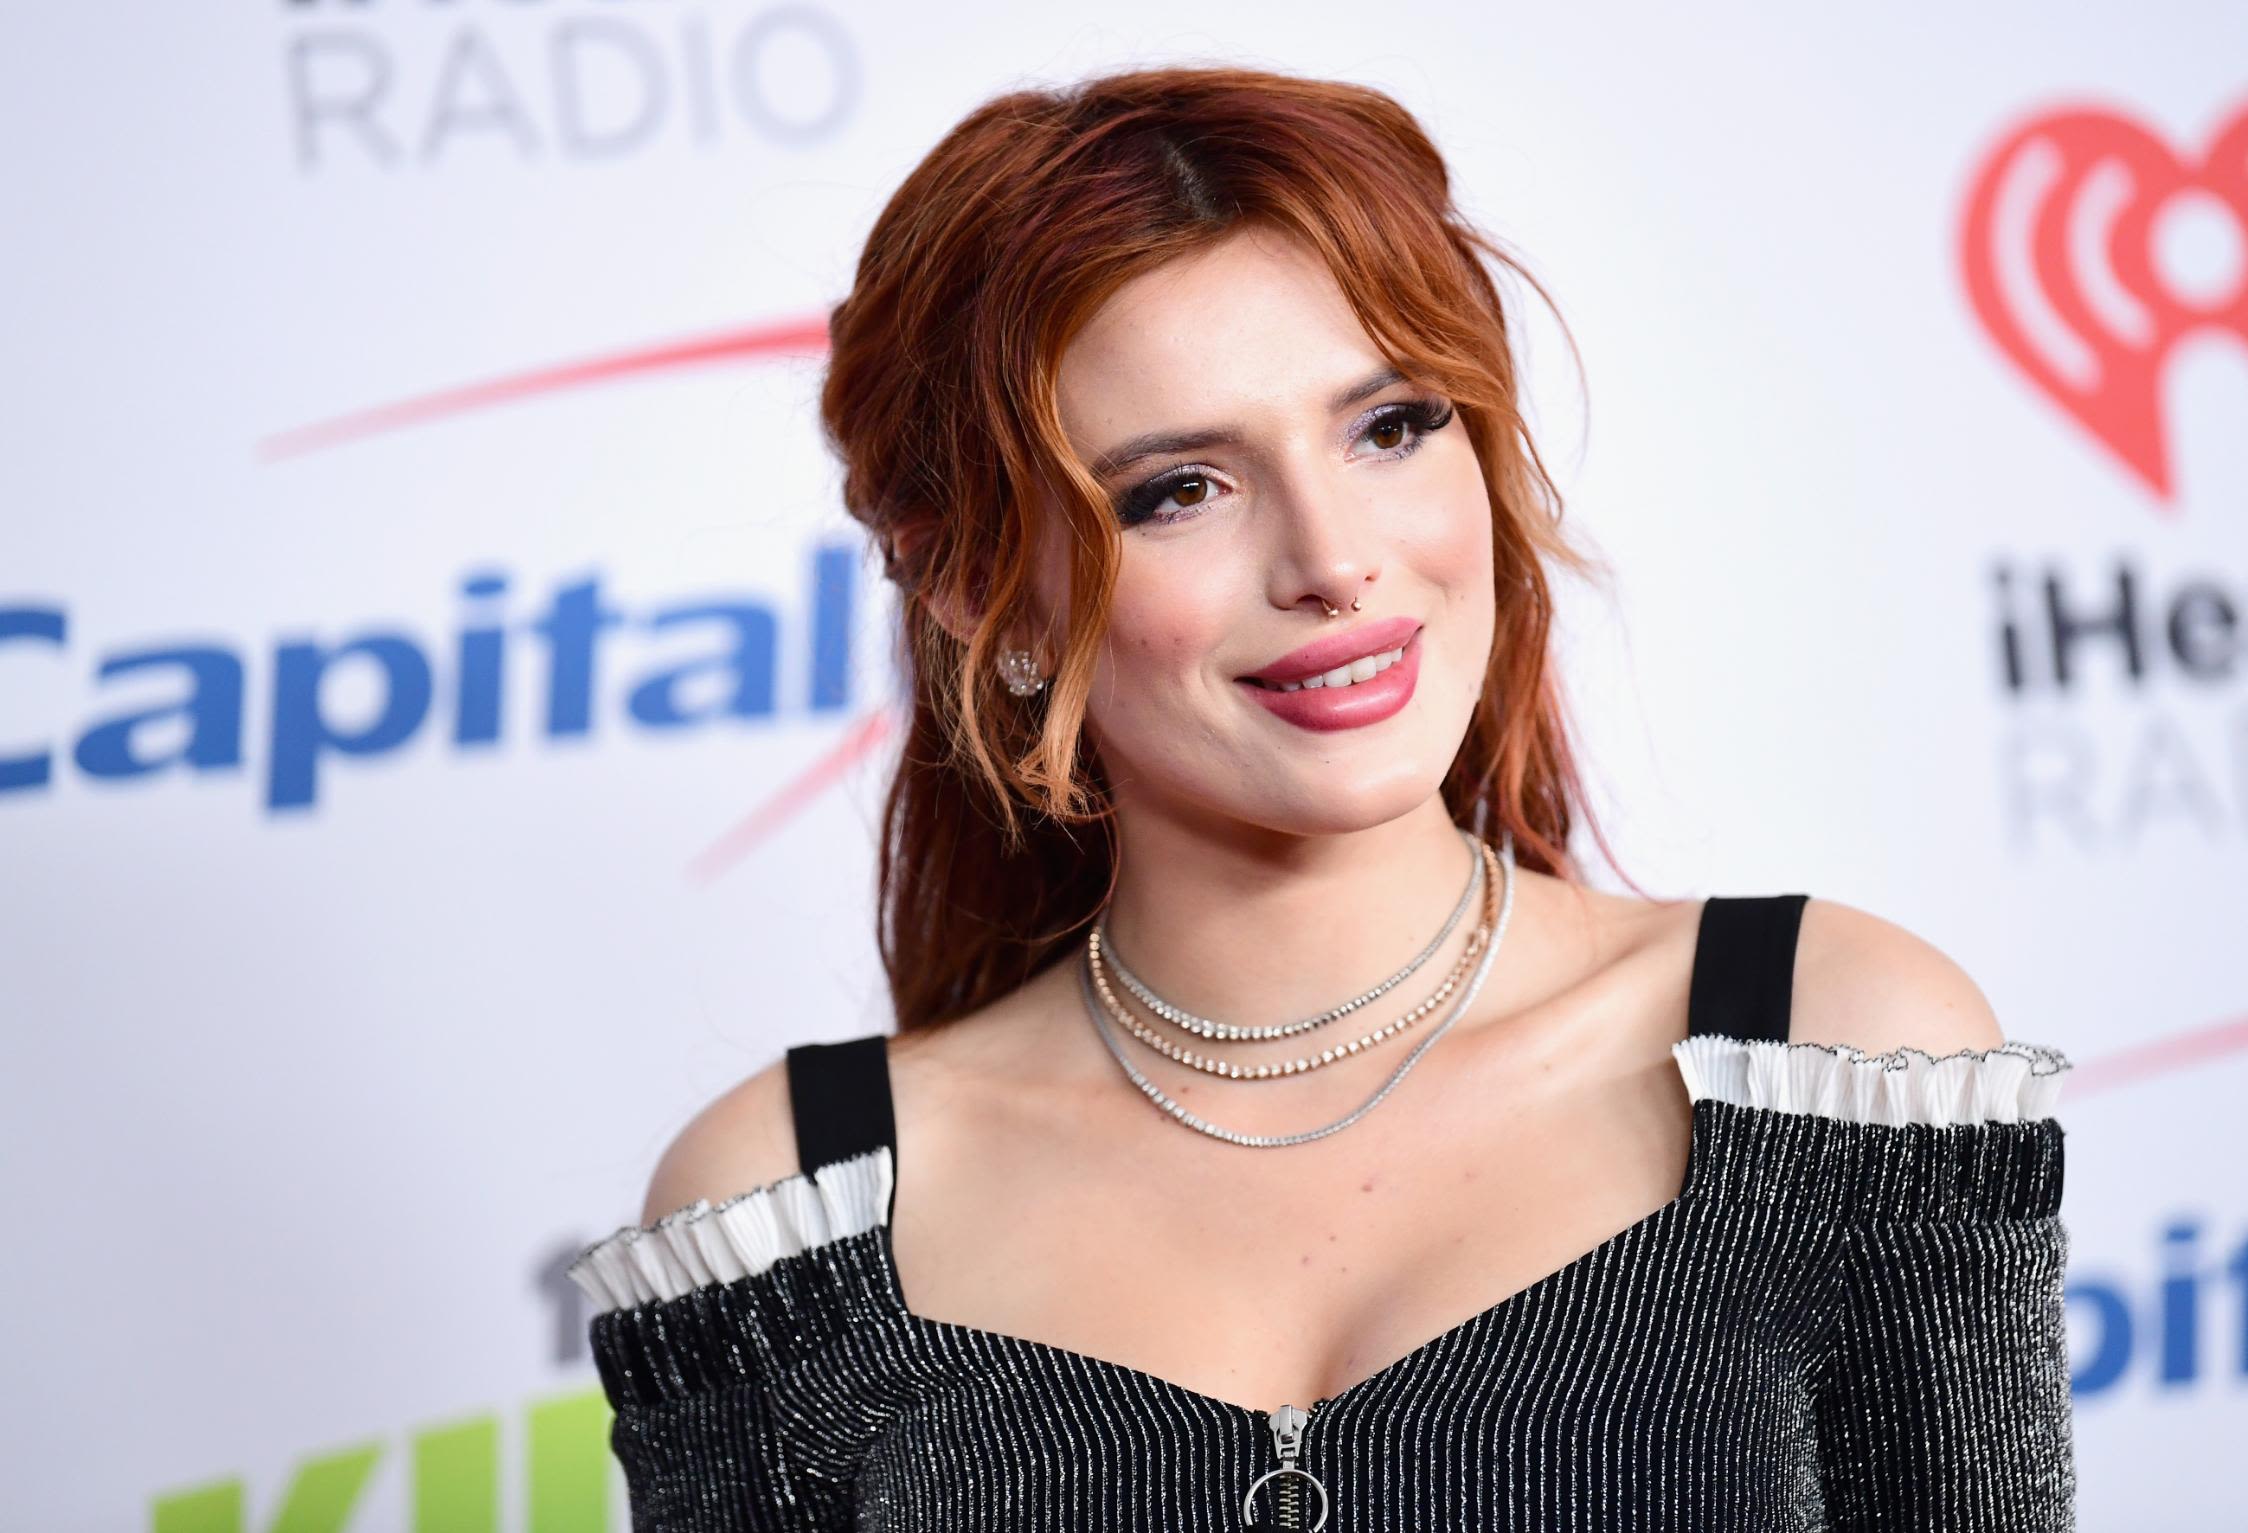 Bella Thorne Porn Gallery - Bella Thorne shares nude photos on Twitter after a hacker threatened to  release them | CNN